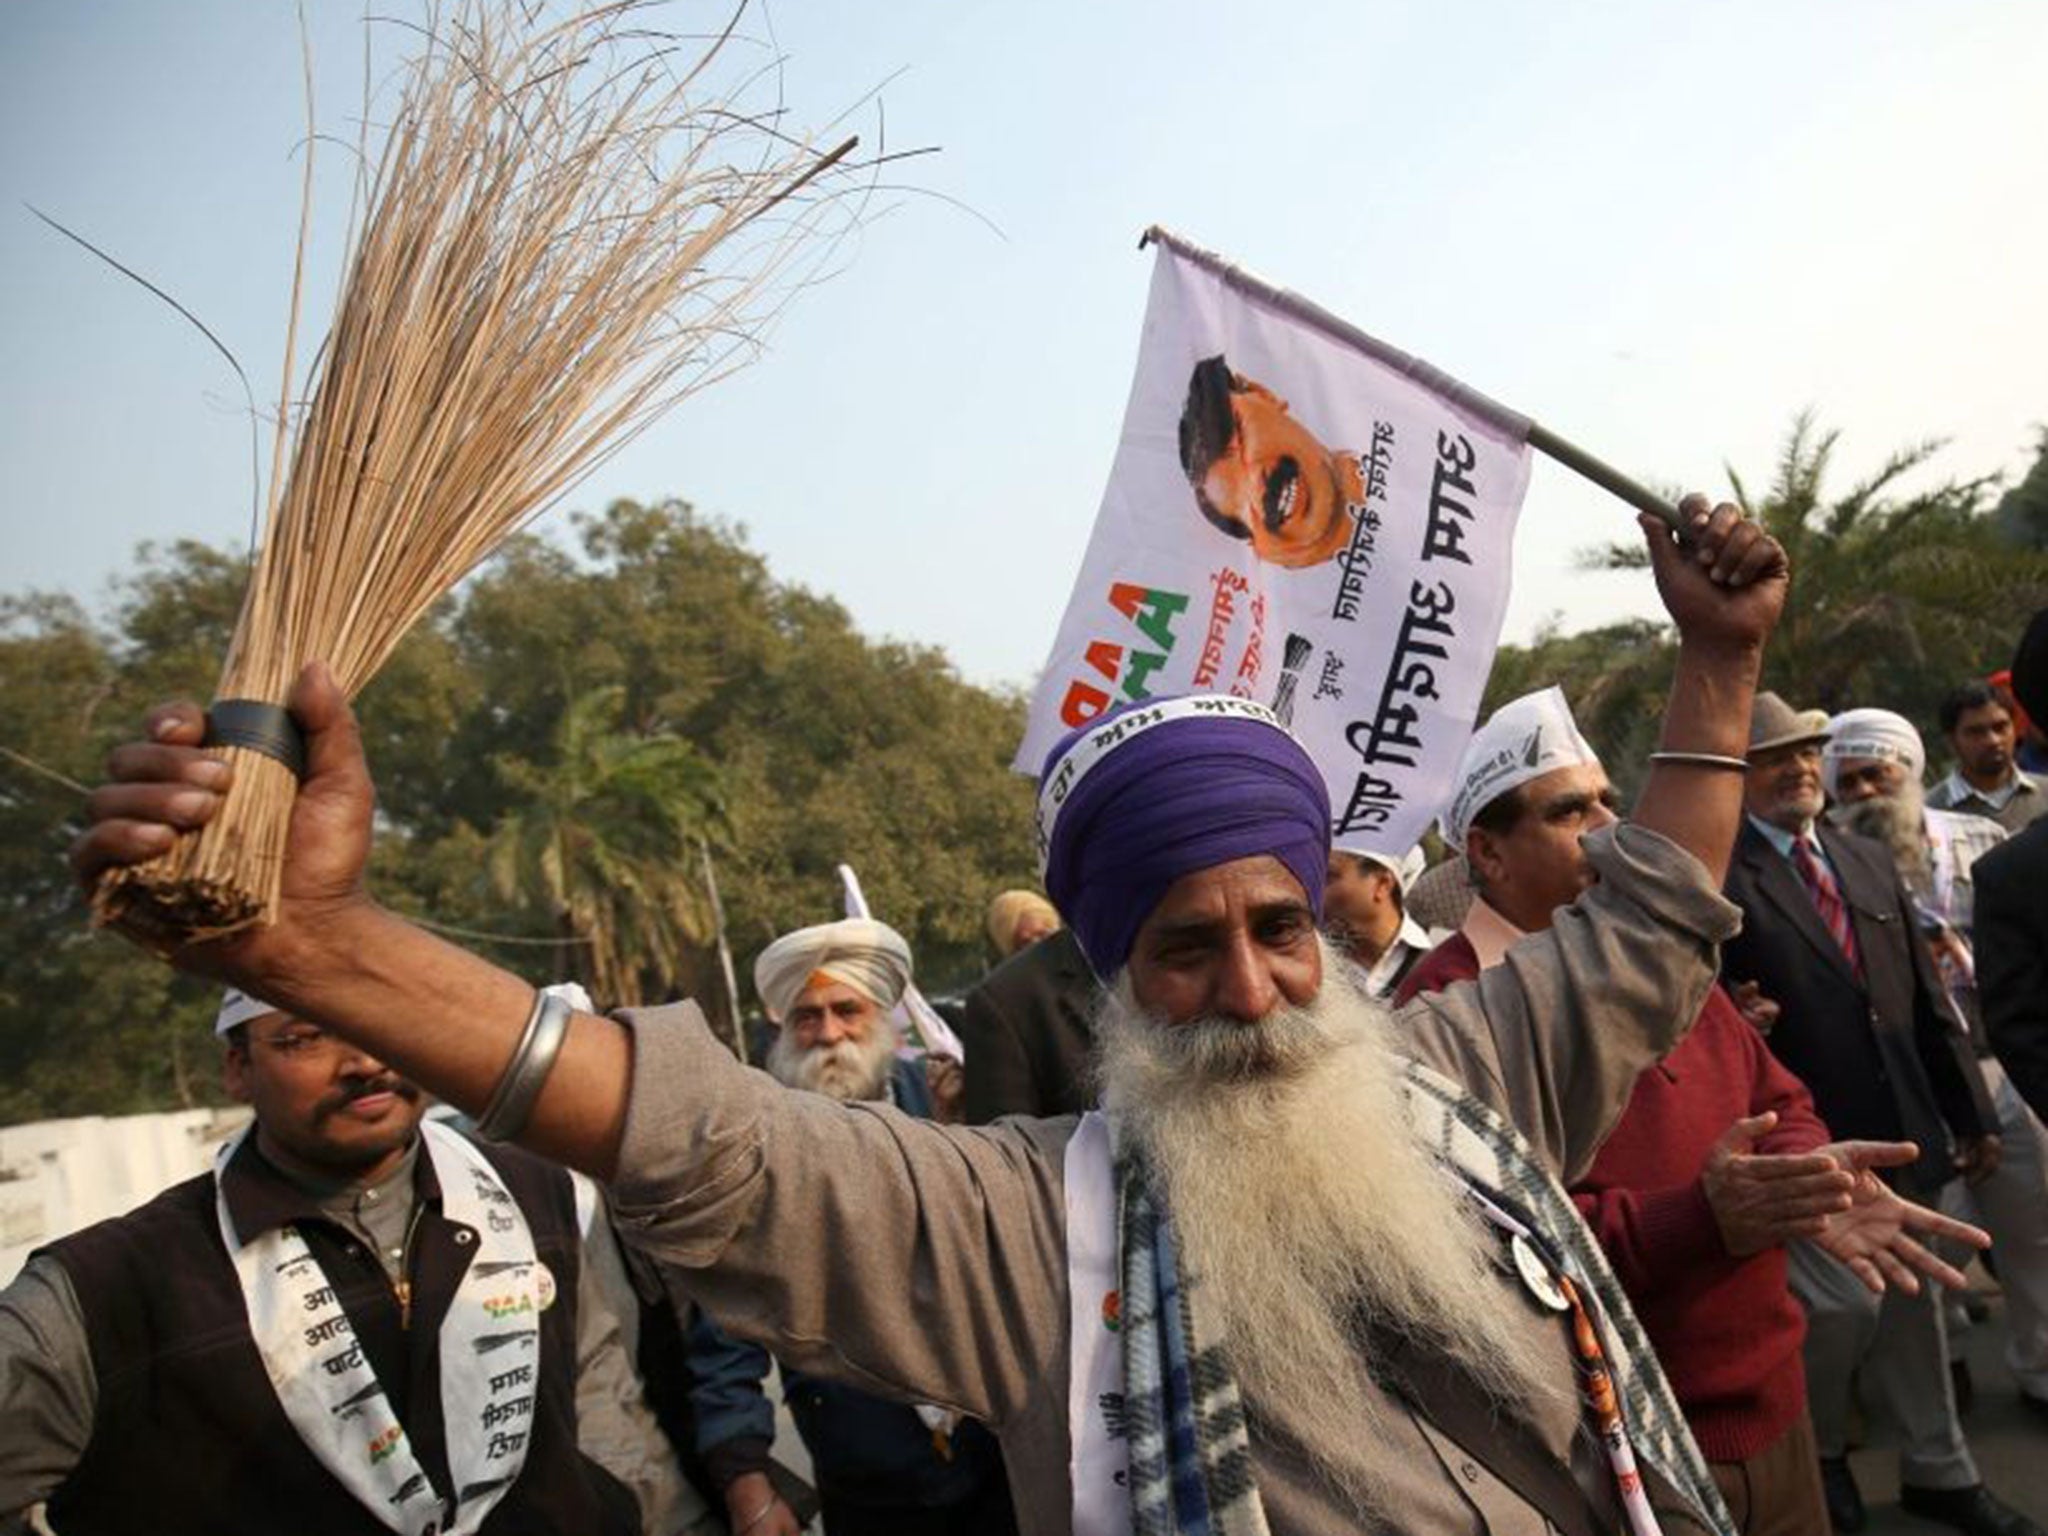 An AAP supporter waves a broom while celebrating its landslide win in Delhi Legislative Assembly elections, in Amritsar, India, on 10 February